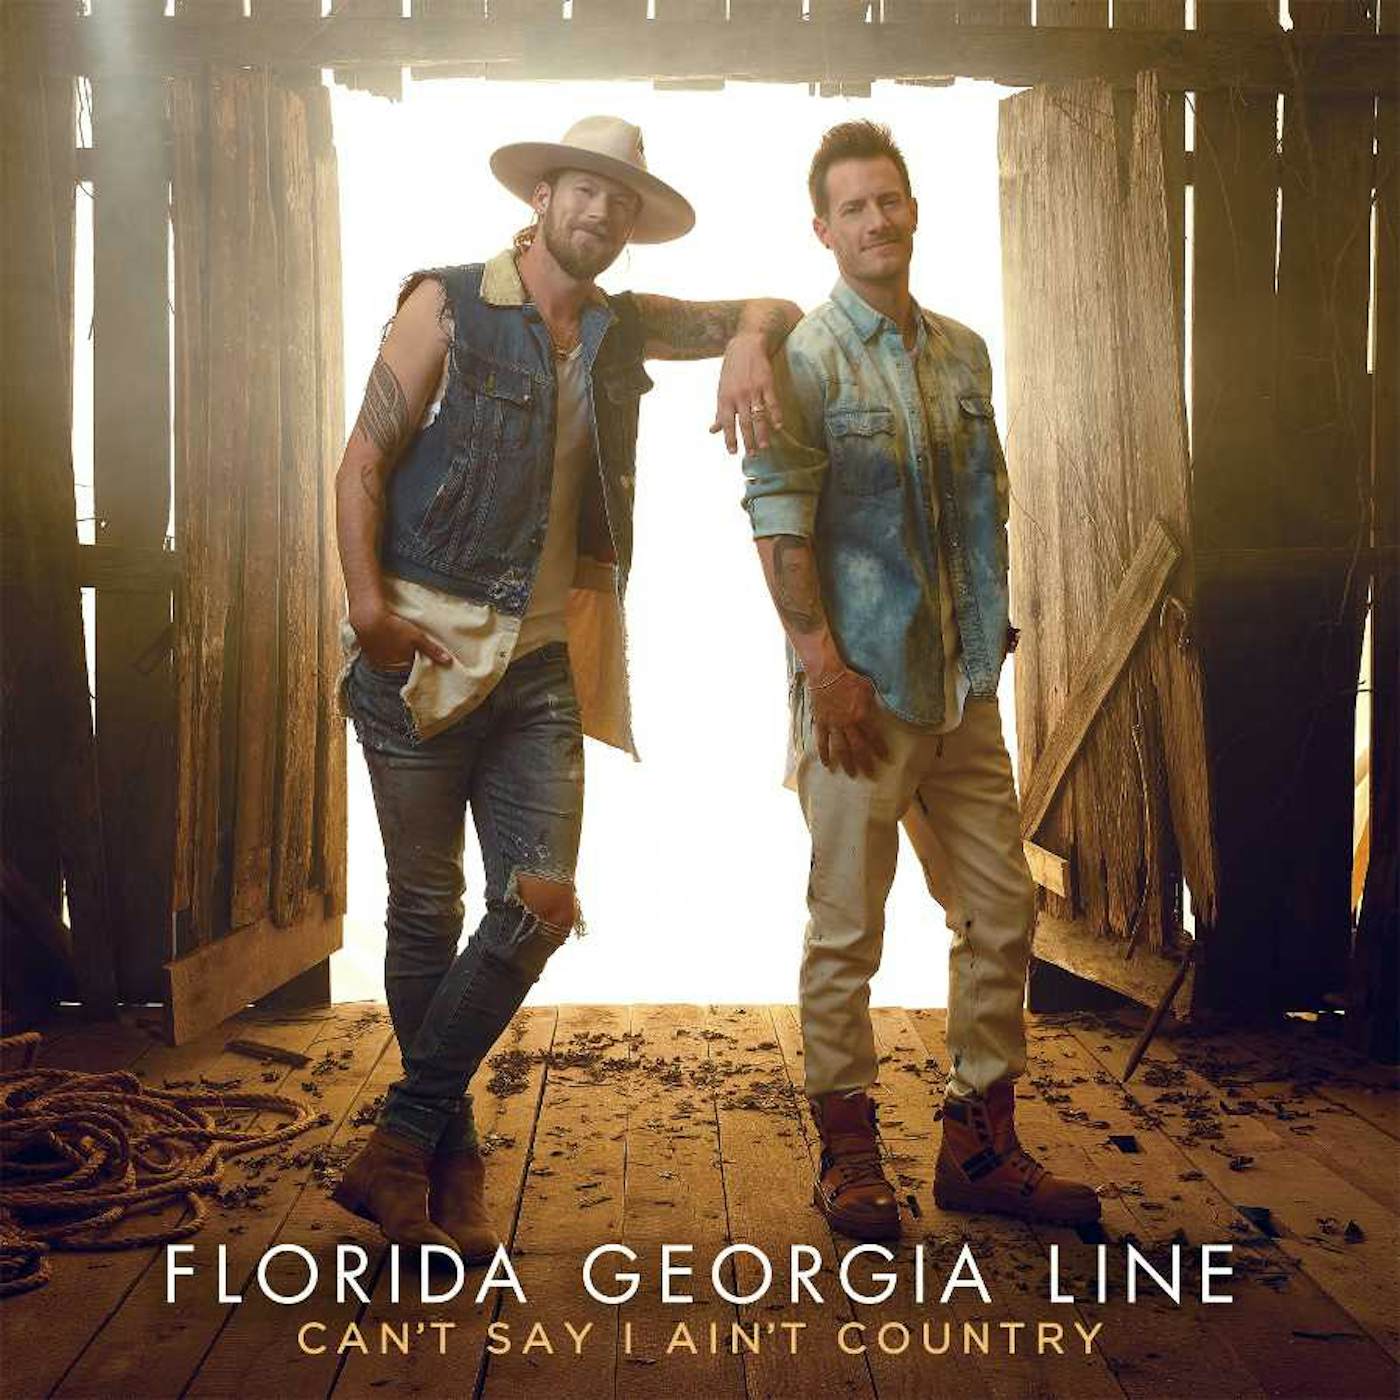 Florida Georgia Line CAN'T SAY I AIN'T COUNTRY CD